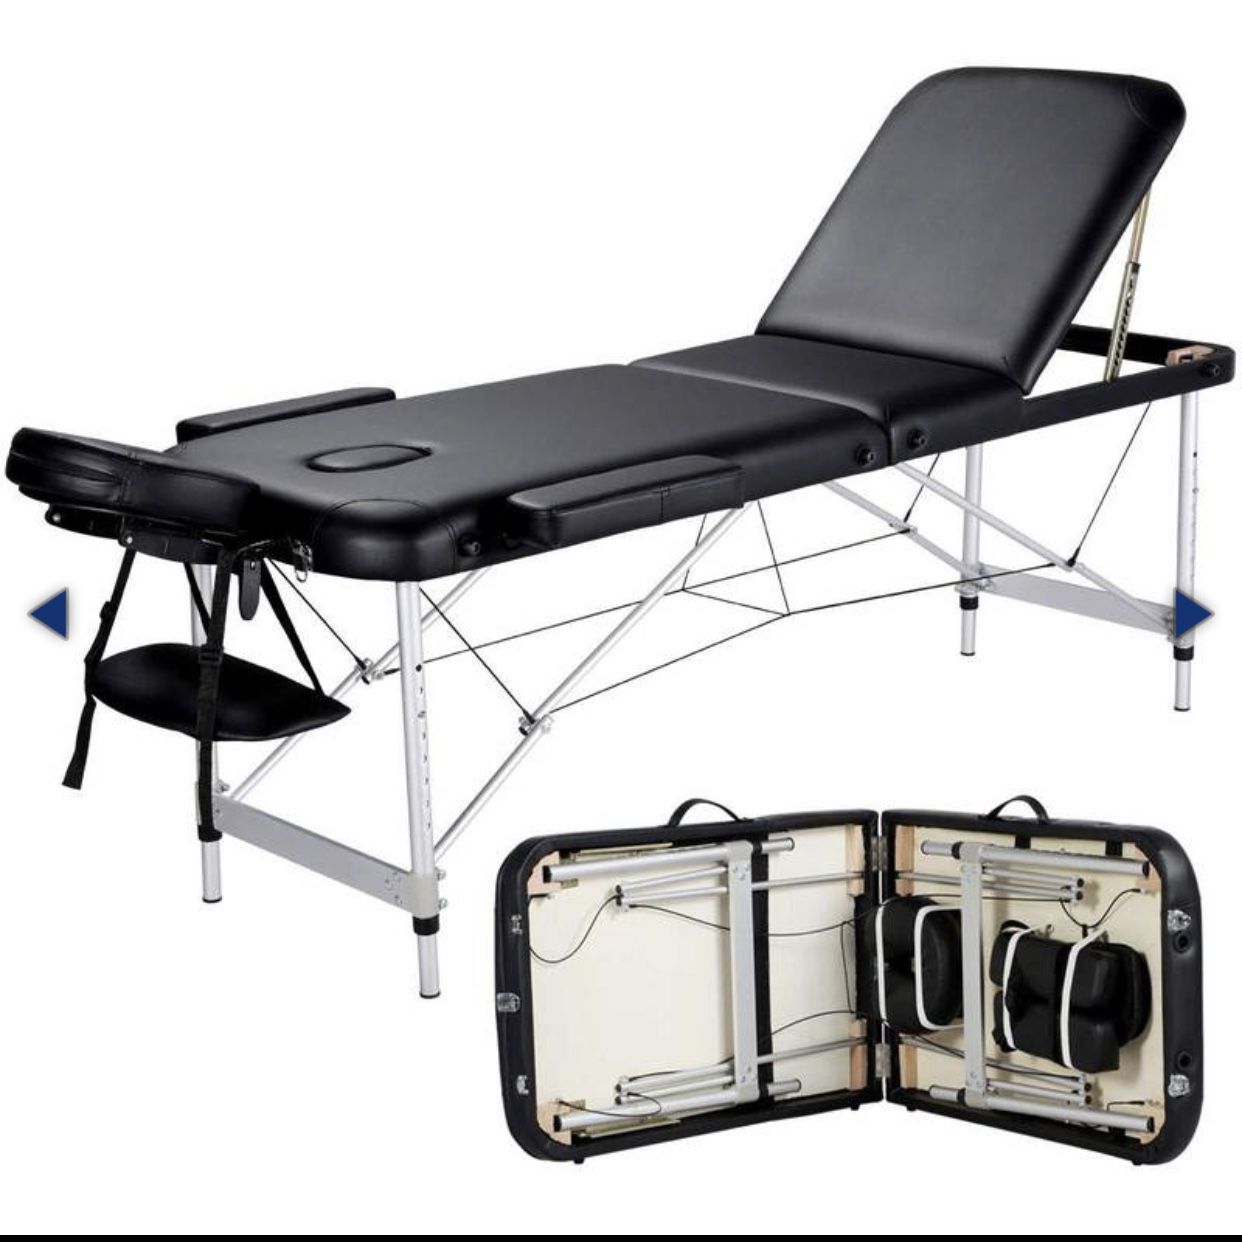 Yaheetech Massage Table With Carrying Case Size 73 Inch Long